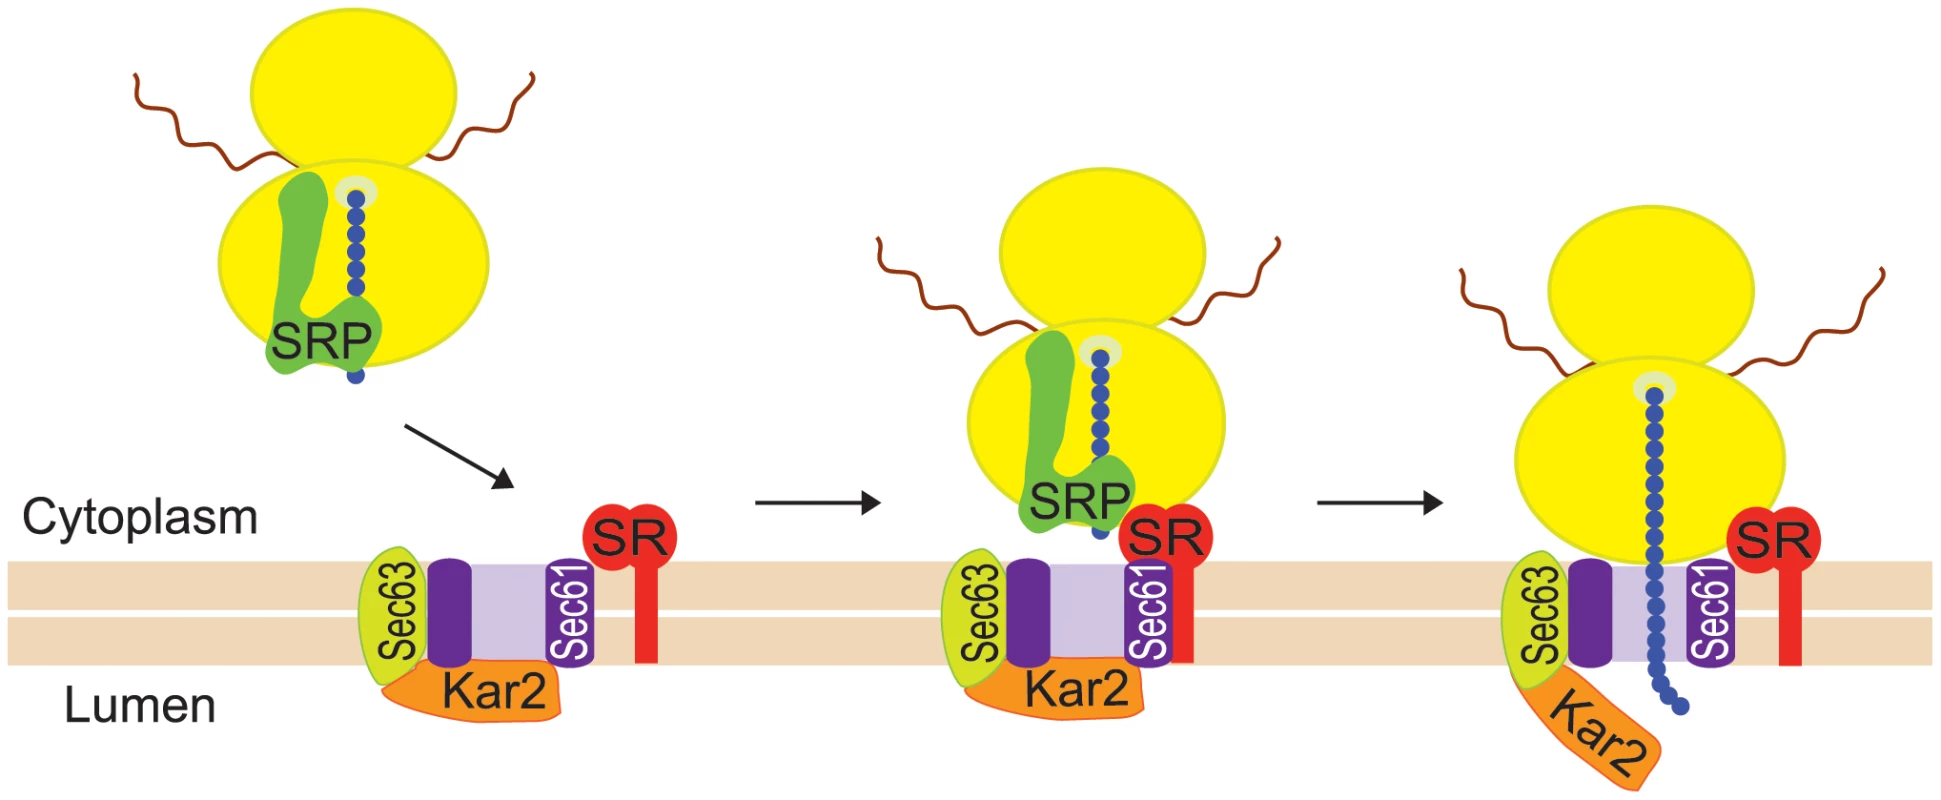 Co-translational targeting of mRNA to the ER is mediated by SRP.